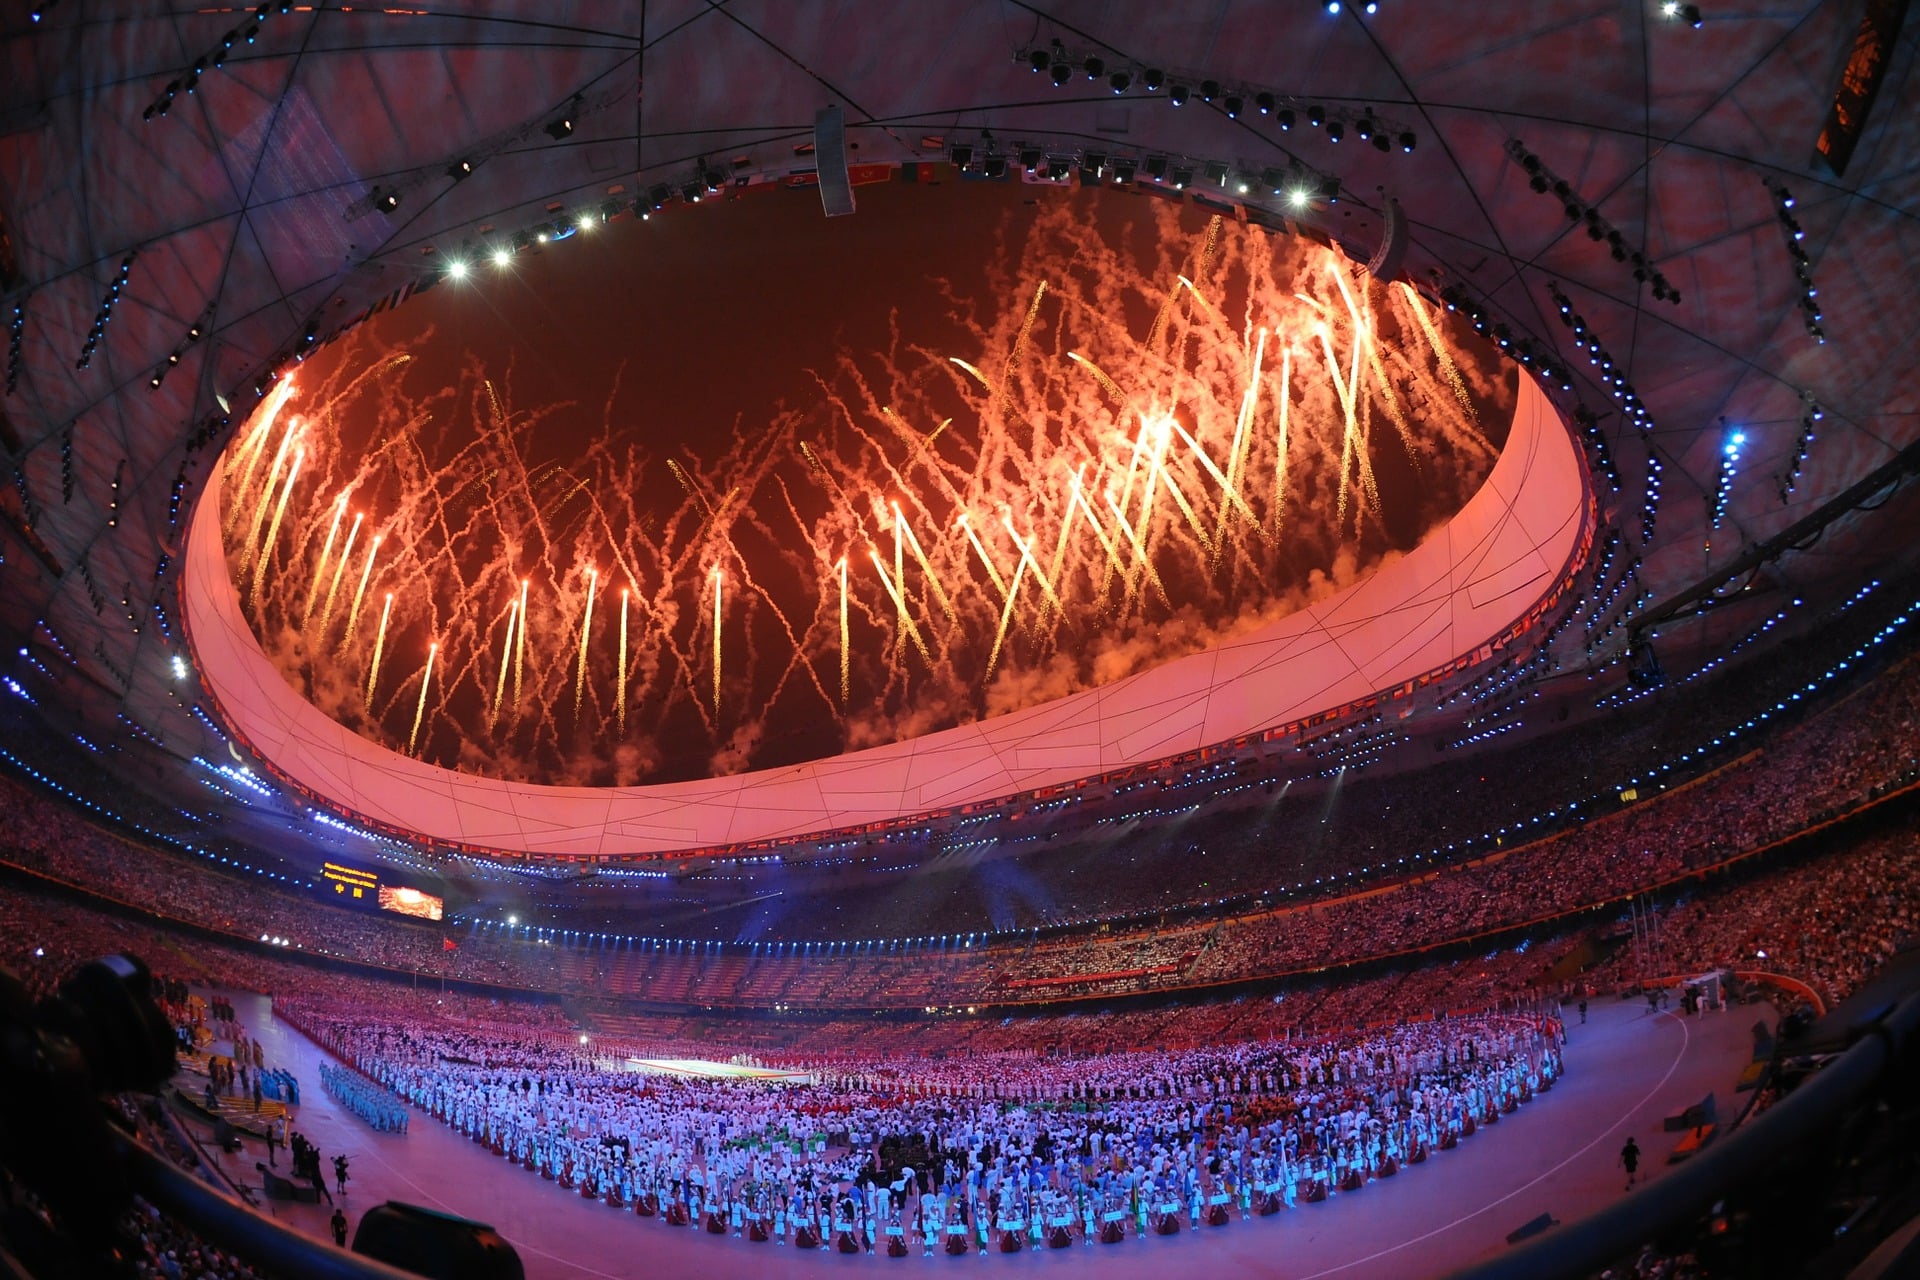 Beijing Opening Olympic Ceremony Fireworks